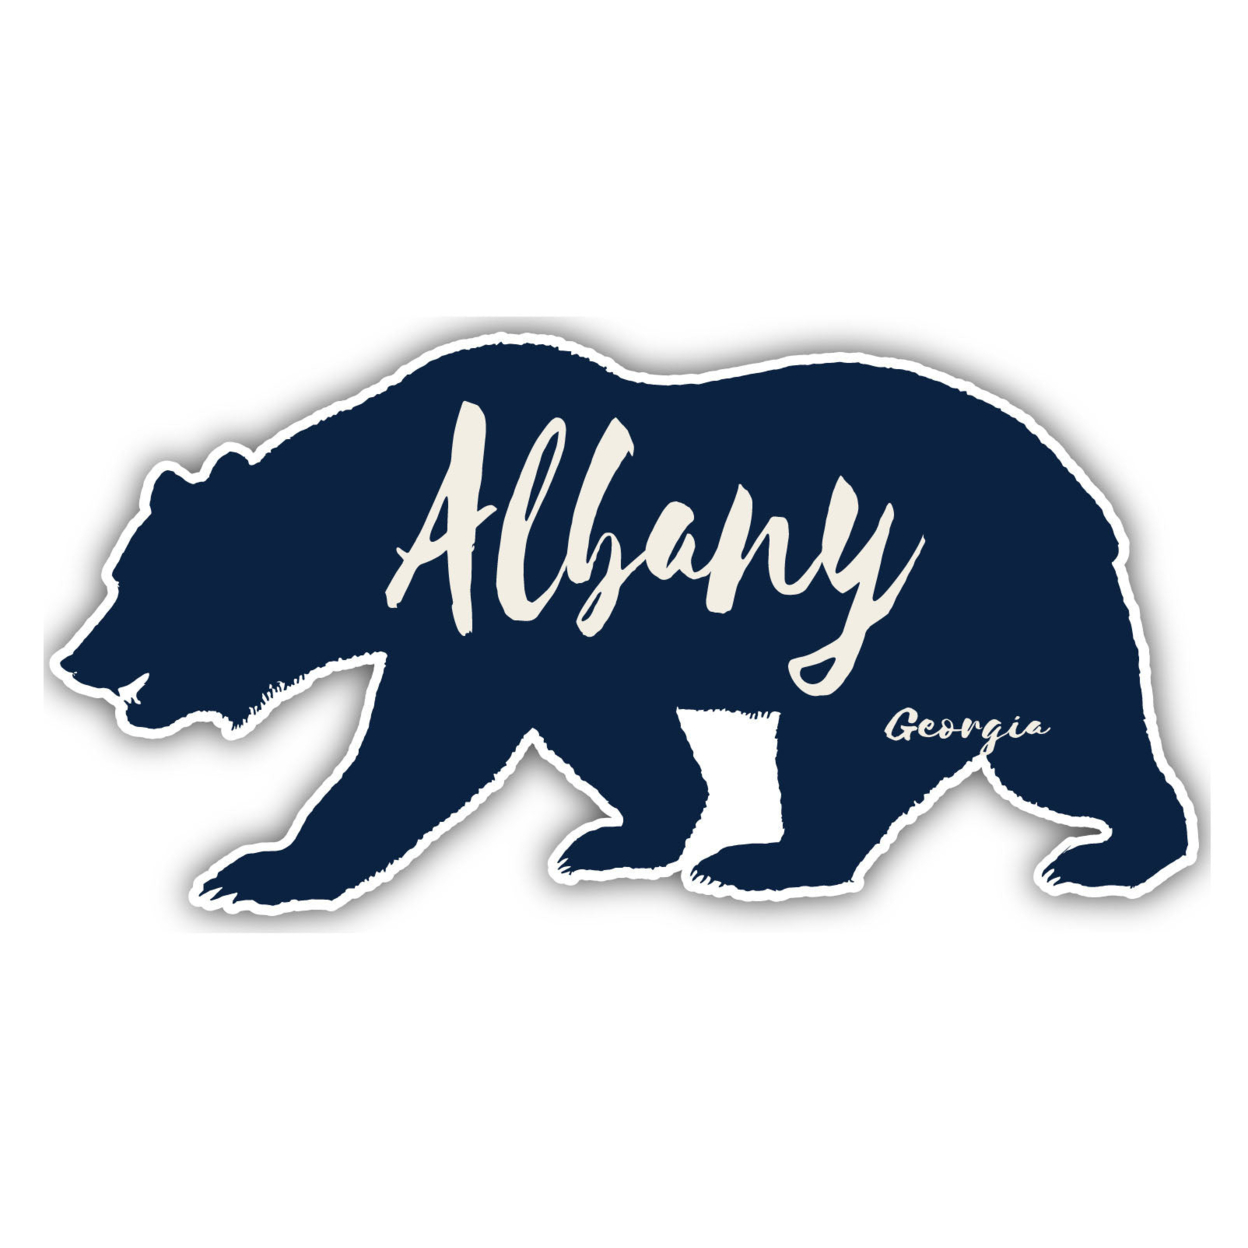 Albany Georgia Souvenir Decorative Stickers (Choose Theme And Size) - 4-Pack, 10-Inch, Camp Life